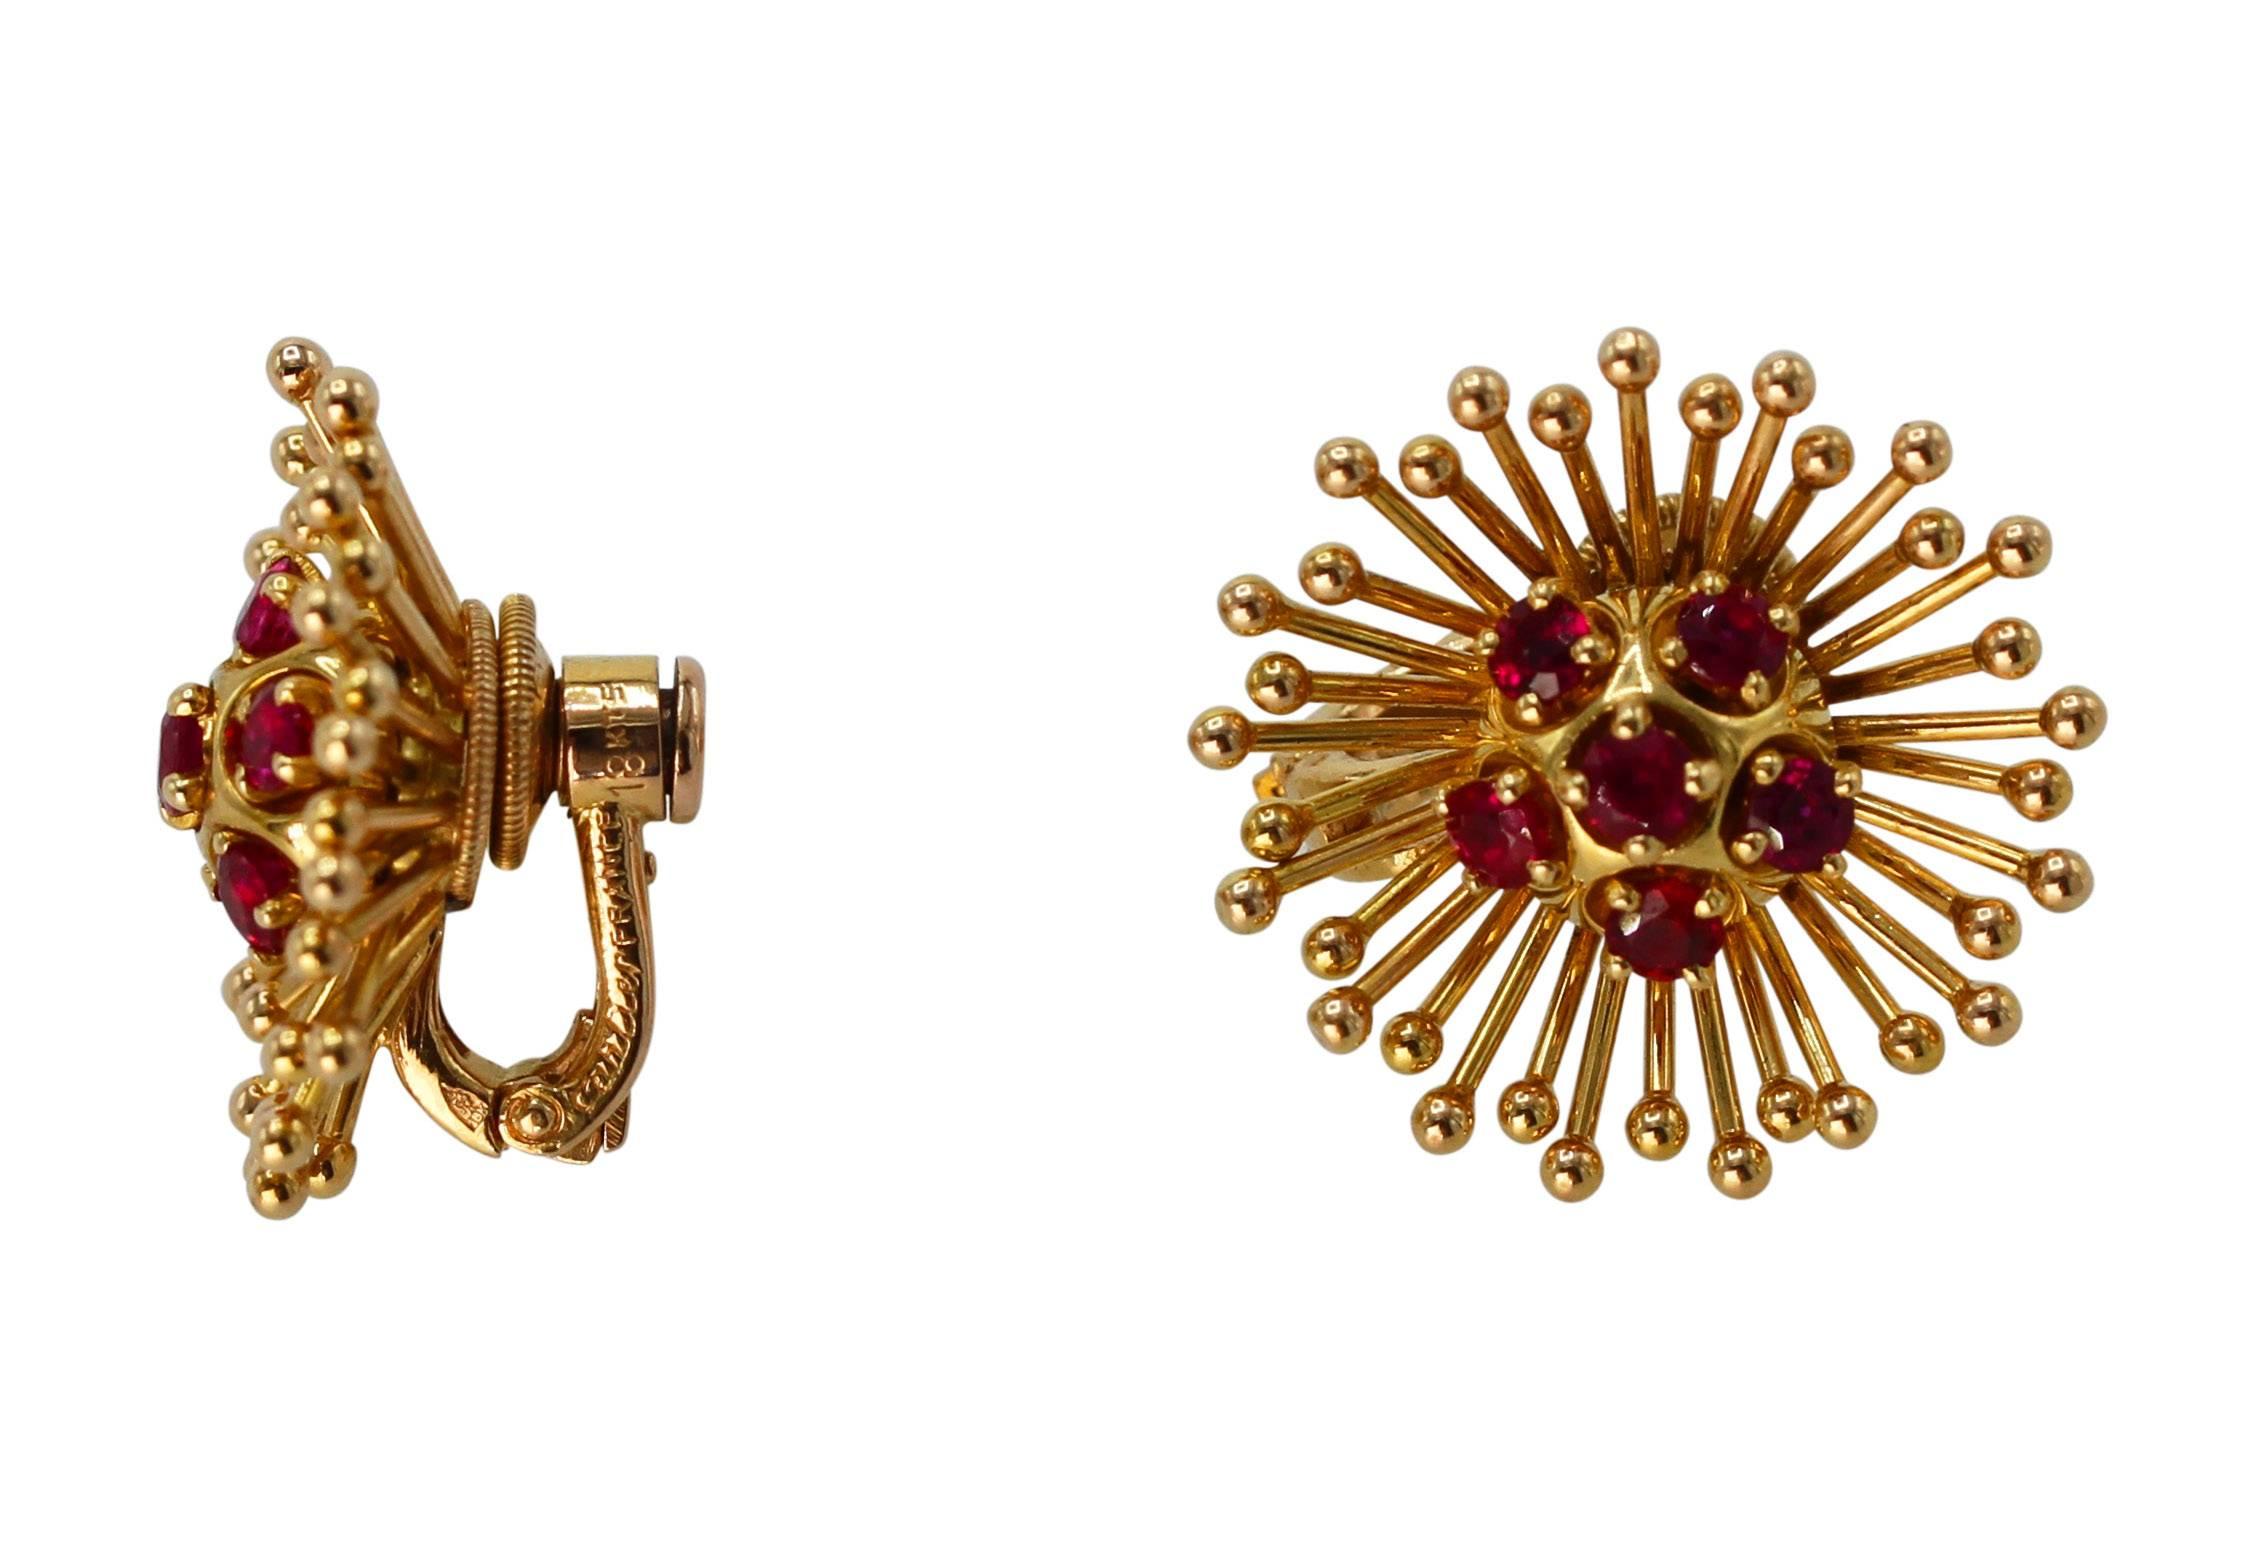 A pair of 18 karat yellow gold and ruby earclips by Cartier, France, circa 1960, designed as flower heads set in the center with 12 round rubies weighing approximately 2.40 carats, with gold tendril petals, gross weight 13.4 grams, measuring 7/8 by